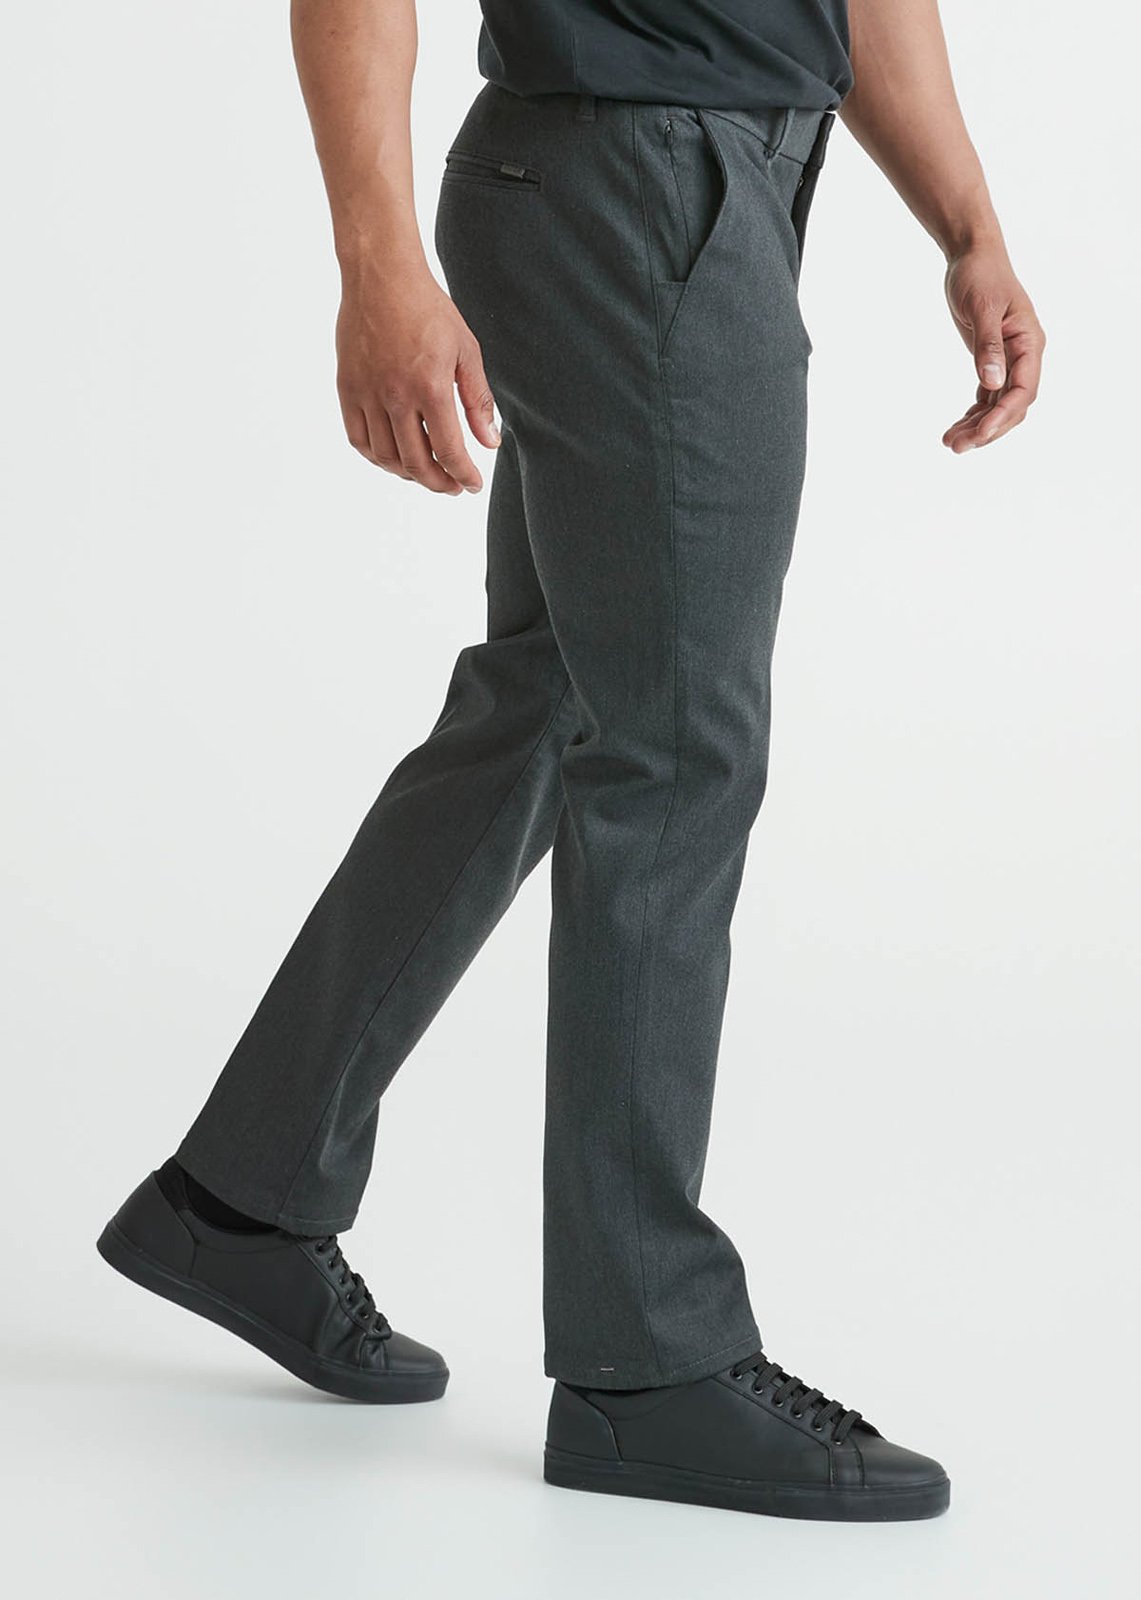 Under Armour Men's Stretch Woven Pants | Dick's Sporting Goods